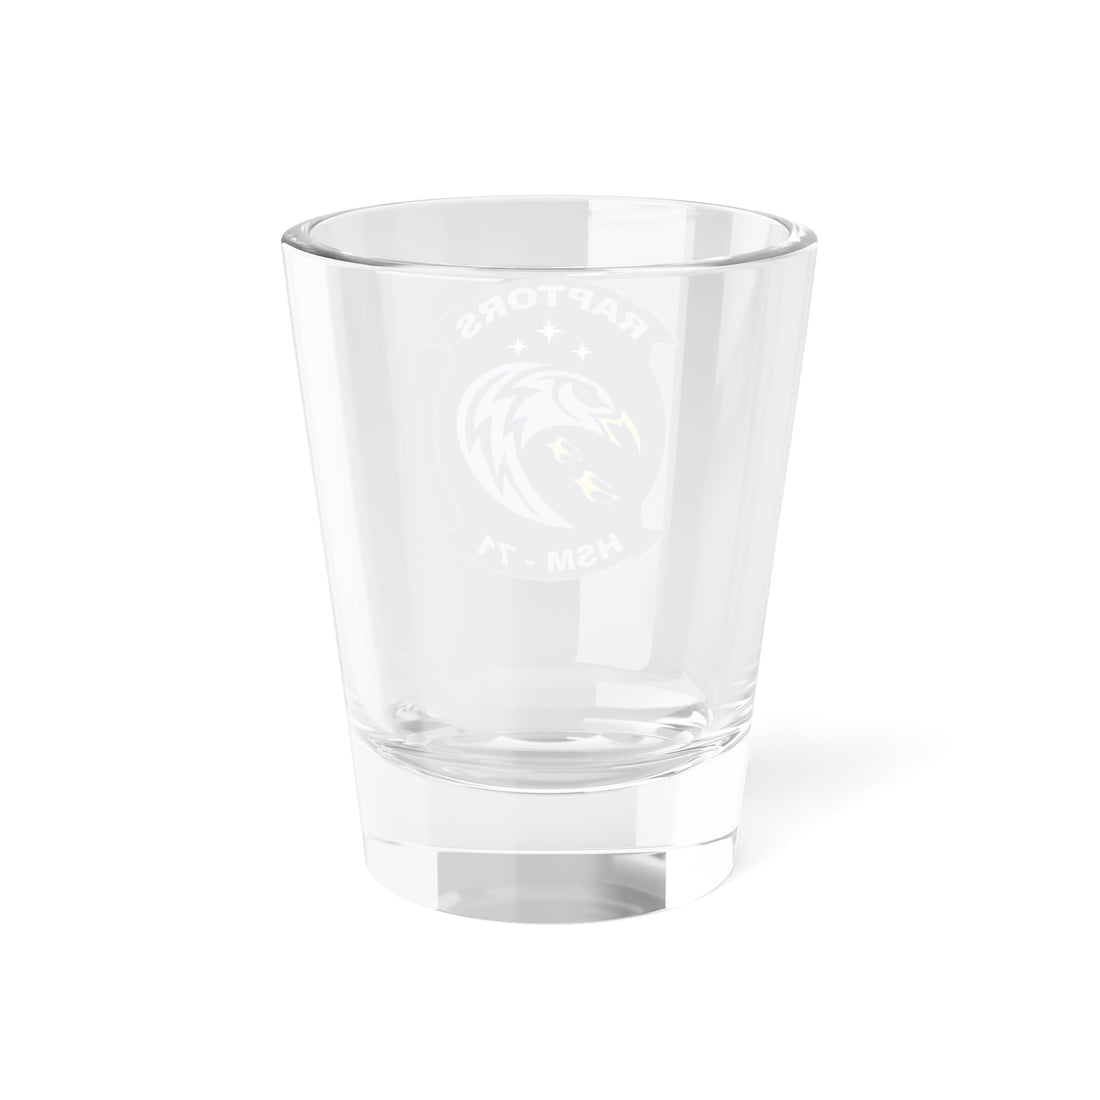 HSM-71 "Raptors" Shot Glass, Navy Helicopter Maritime Strike Squadron flying the MH-60R Seahawk